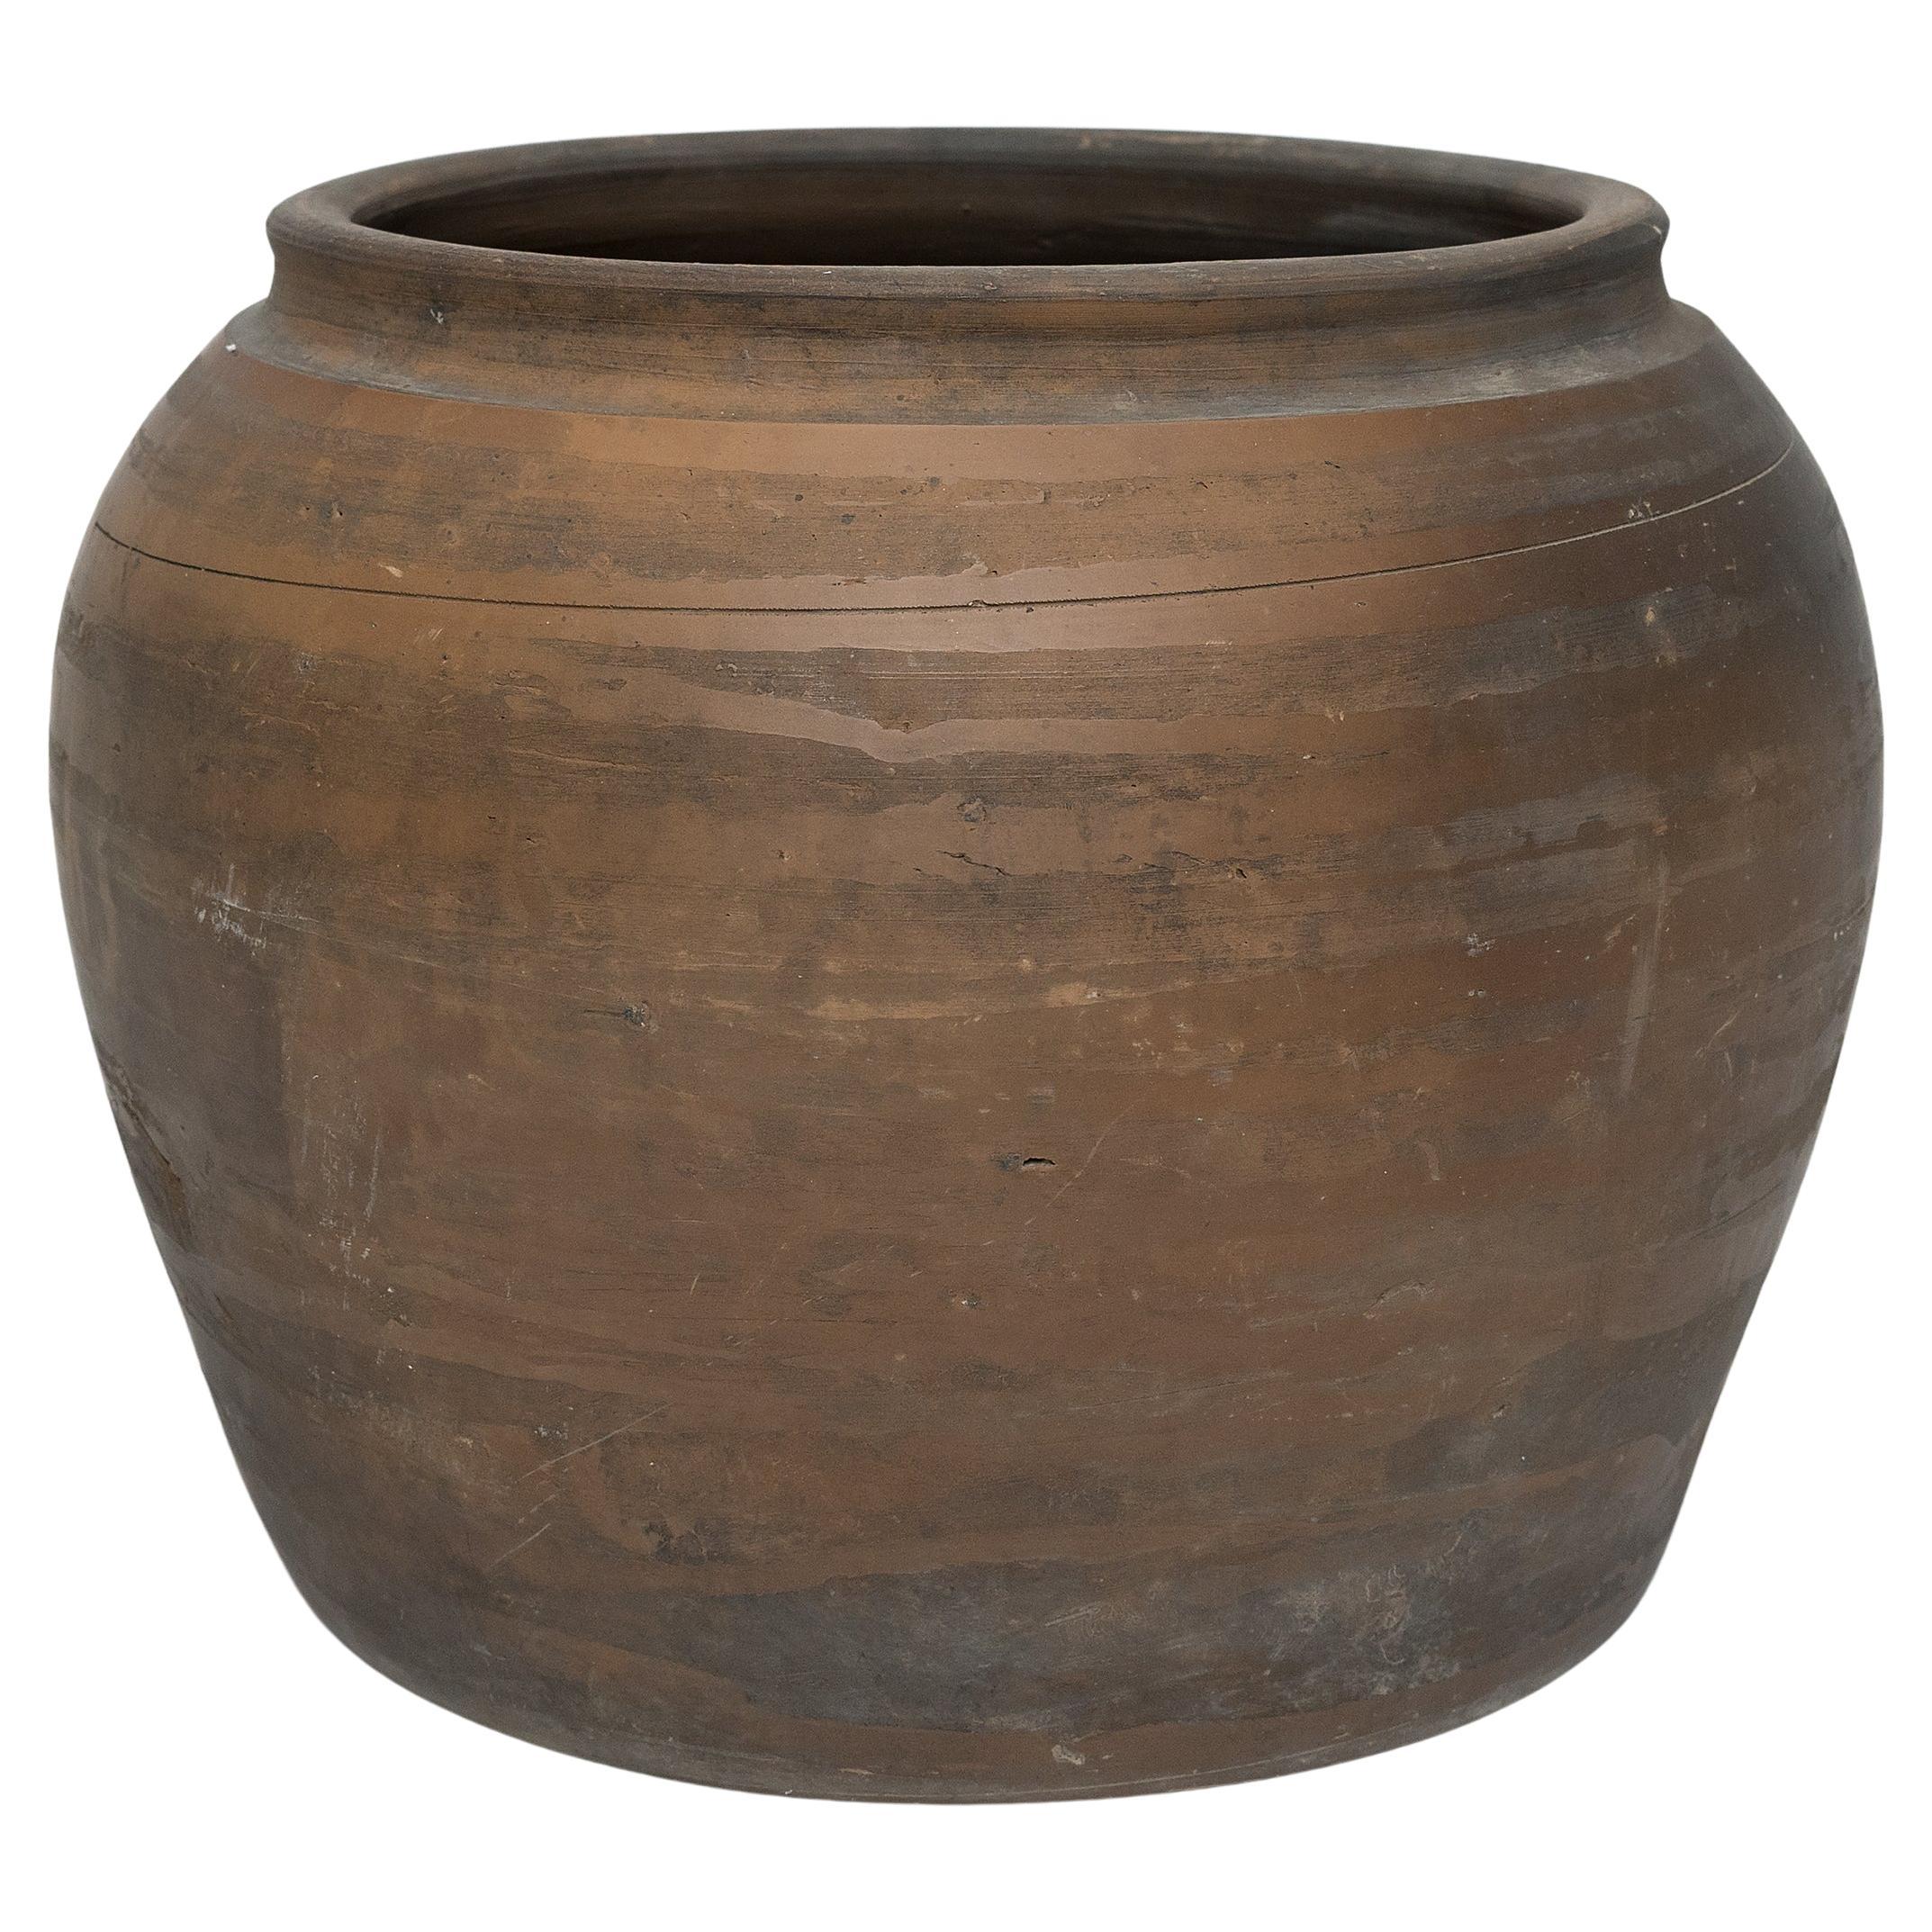 What were clay vessels used for?